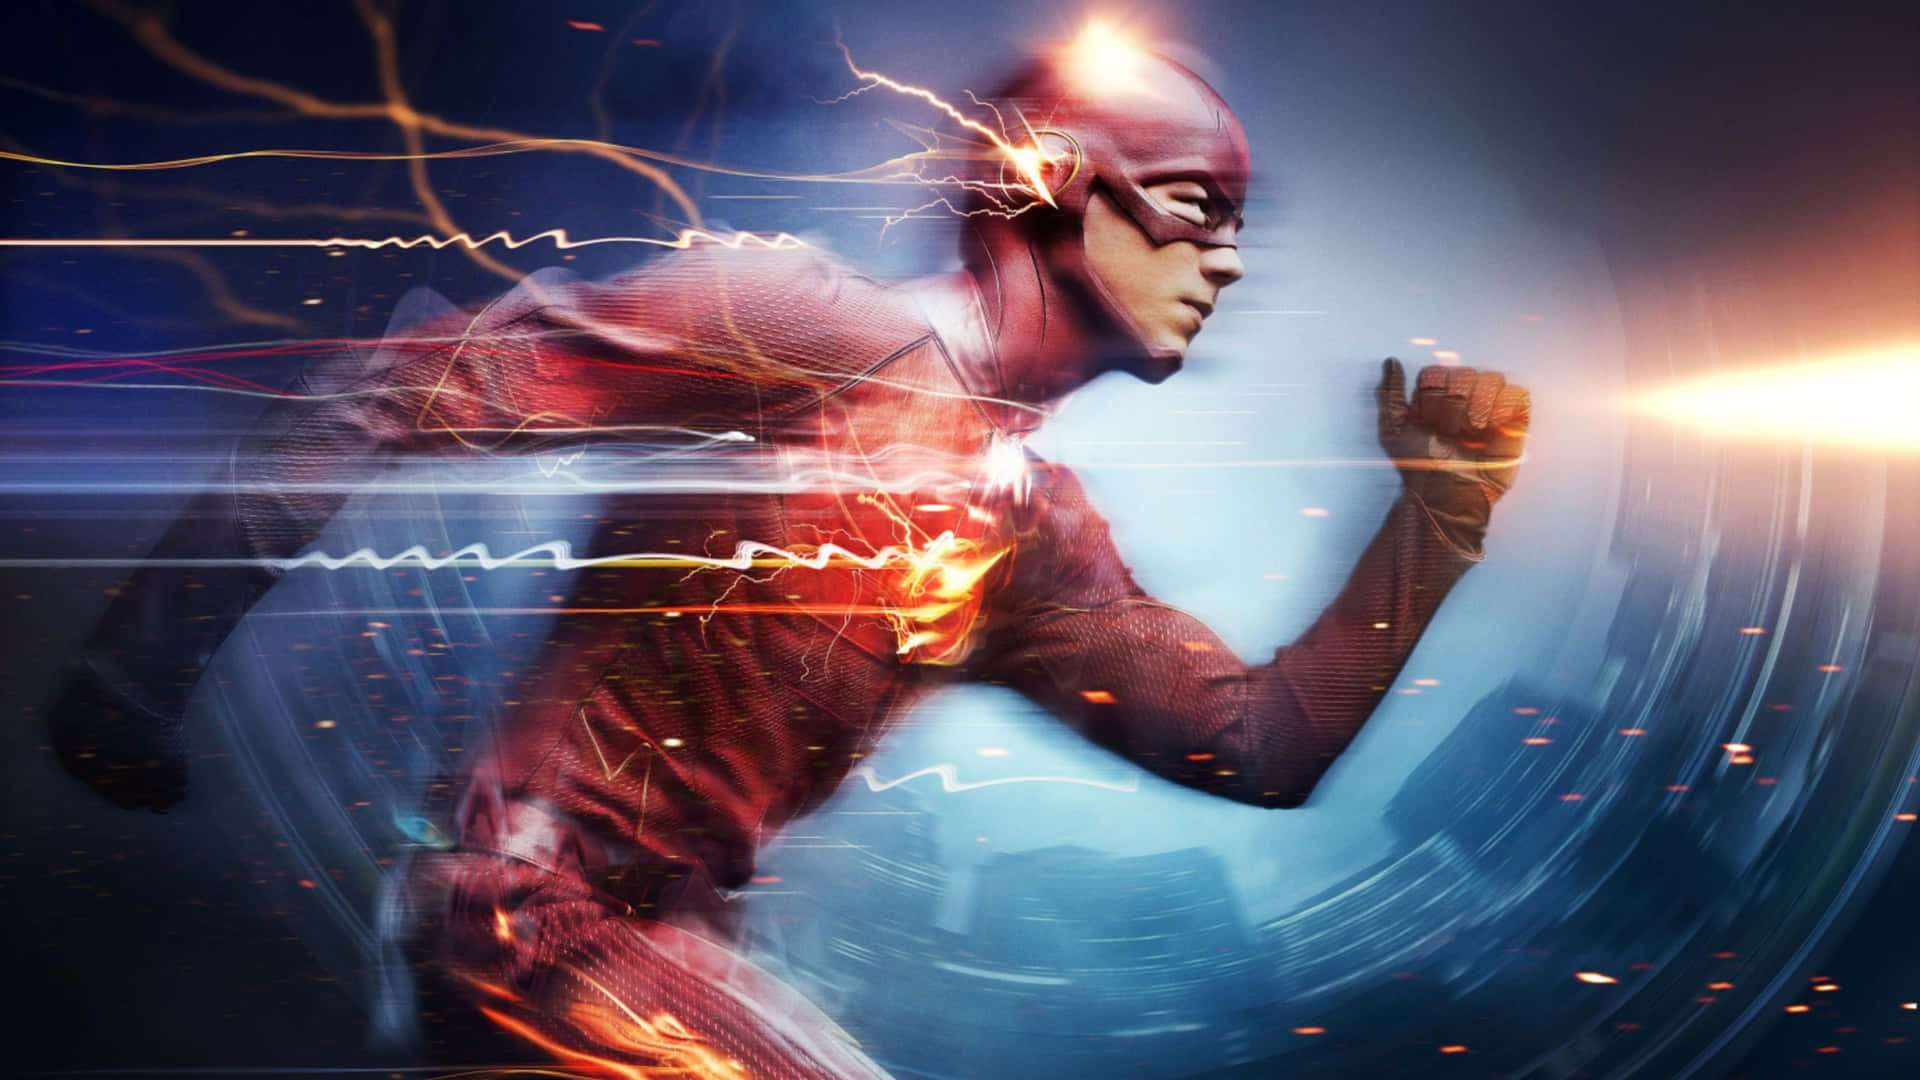 The Flash running at high-speed through Central City